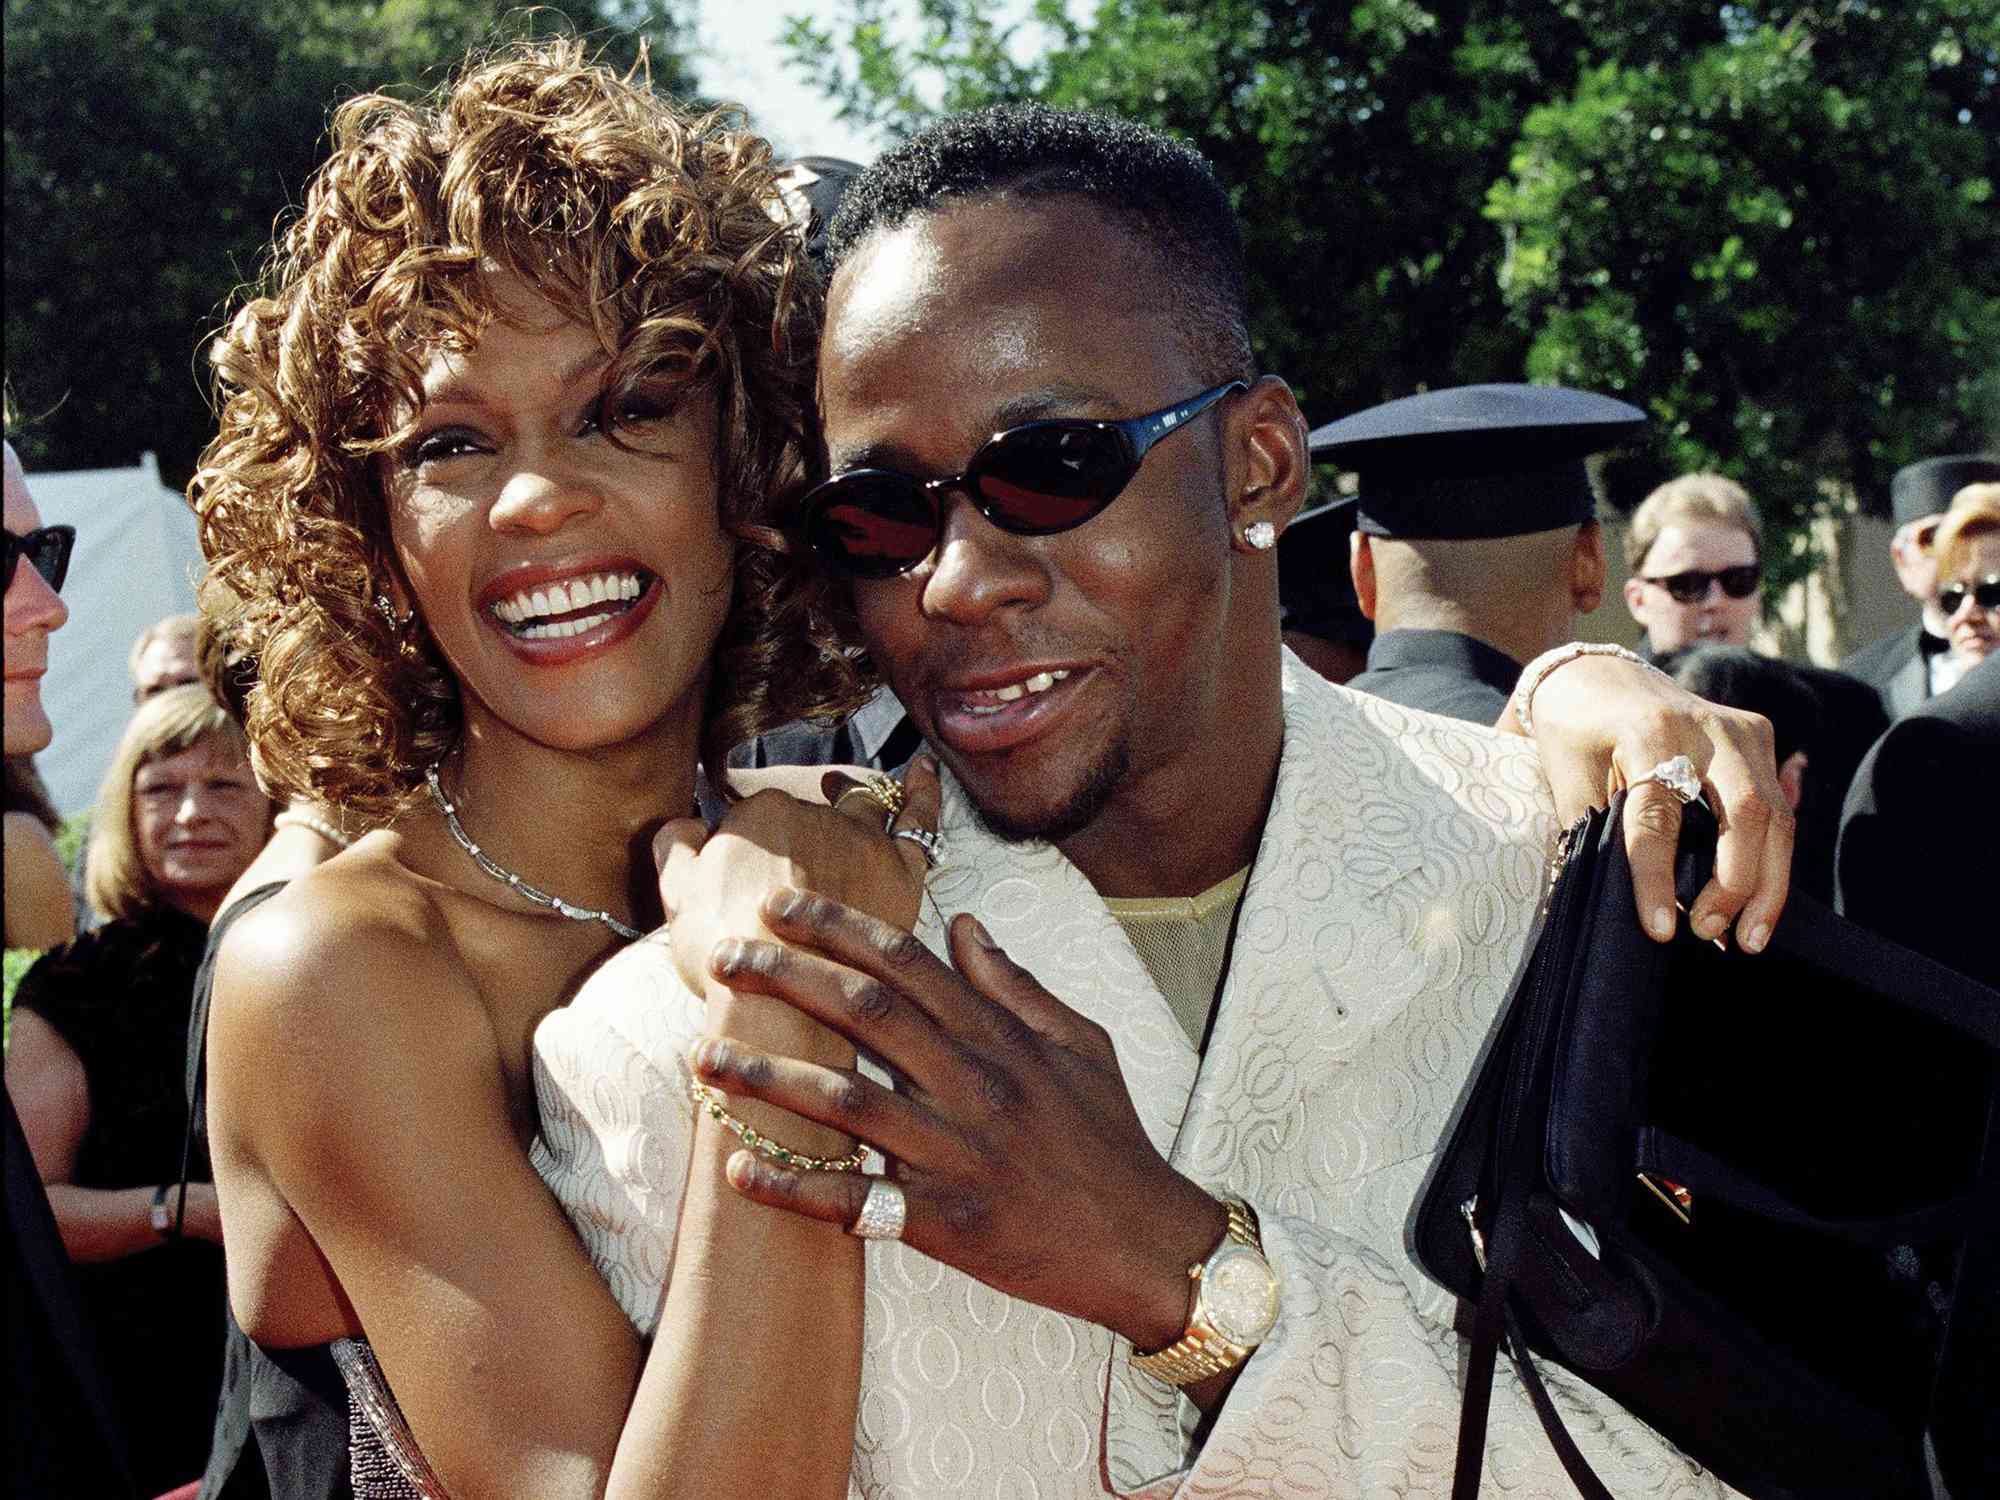 Whitney Houston, husband singer Bobby Brown on the red carpet at the 50th Annual Primetime Emmy Awards held at the Shrine Auditorium in Los Angeles, CA on September 13, 1998